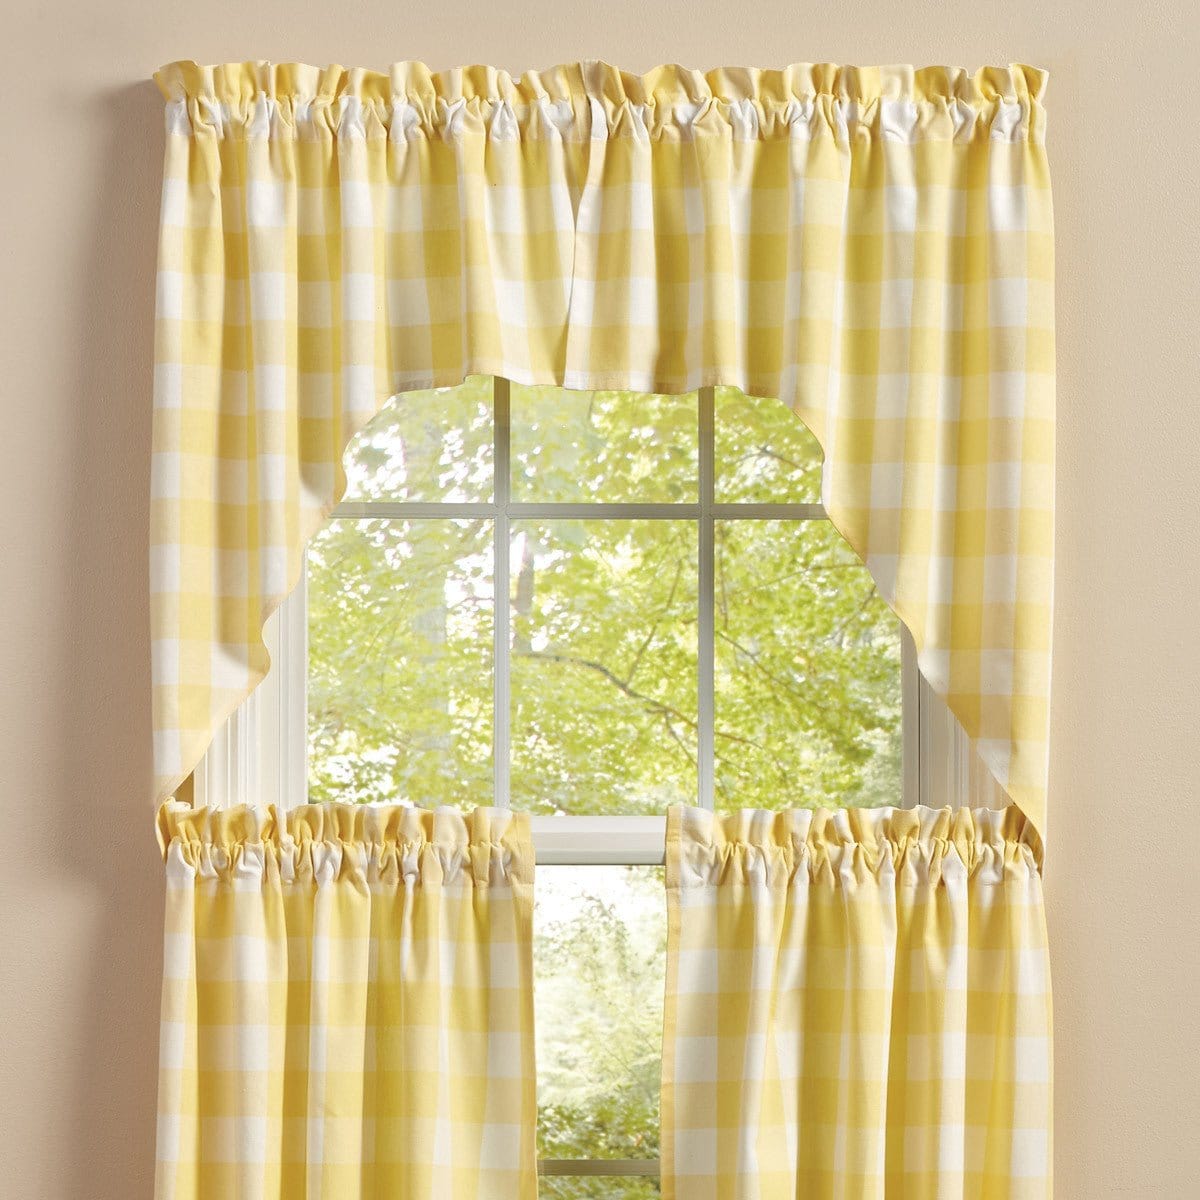 Wicklow Check in Yellow Swag Pair 36" Long Unlined-Park Designs-The Village Merchant